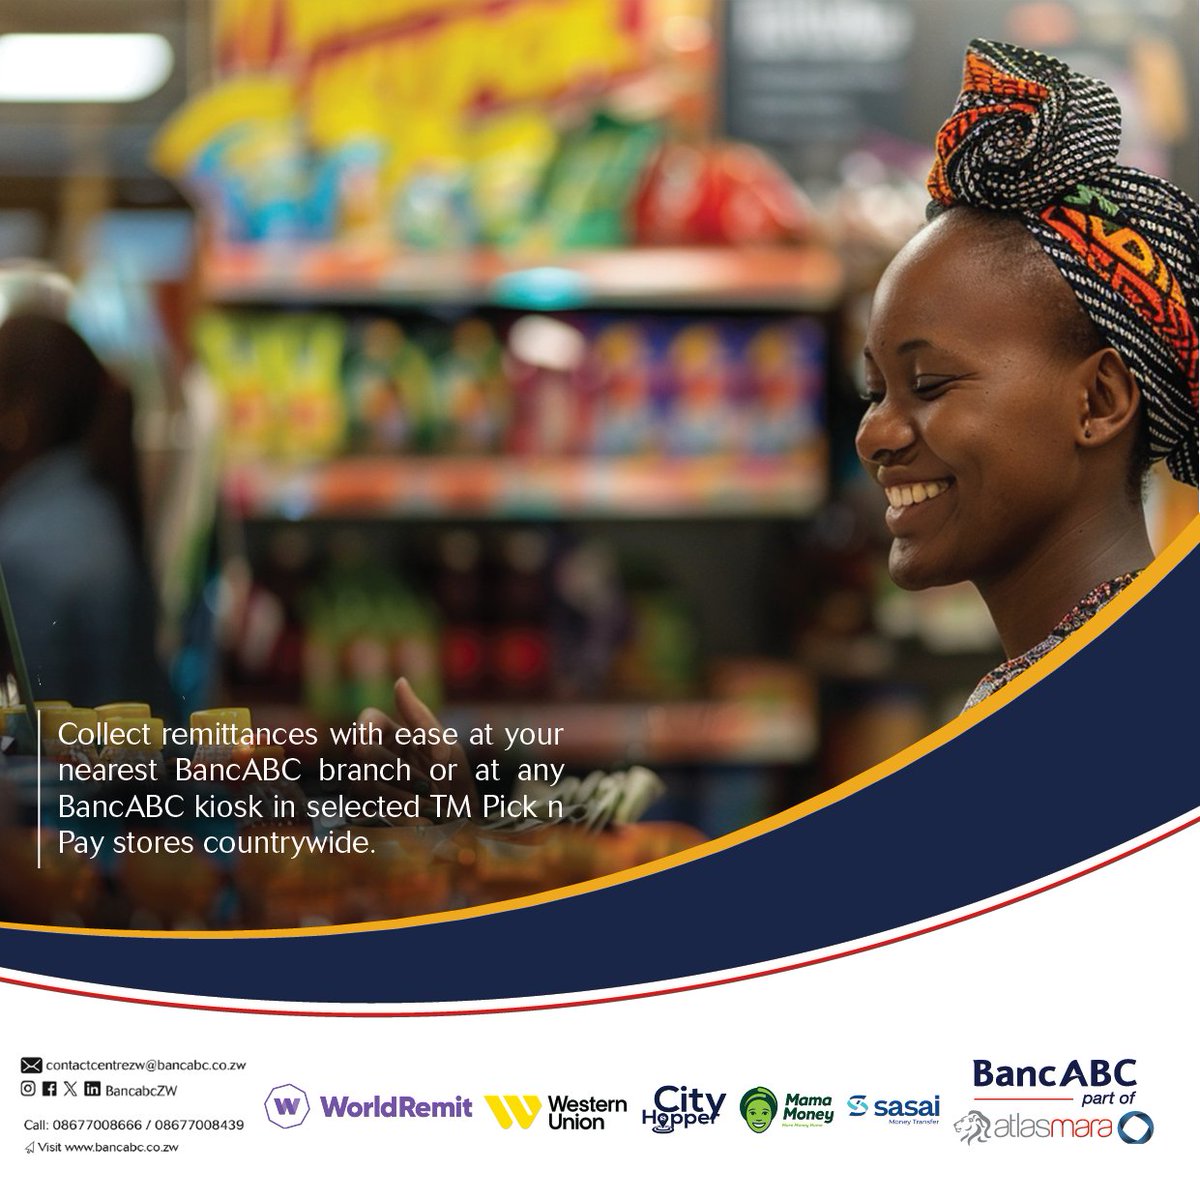 Enjoy the convenience of accessing 💸 ✅ World Remit ✅ Mukuru ✅ City Hopper ✅ Western Union ✅ Mama Money ✅ Sasai Money Transfer Available at BancABC dedicated Remittance Centres in Harare & Bulawayo and at all BancABC branches countrywide 🏦. #BankDifferent🏦